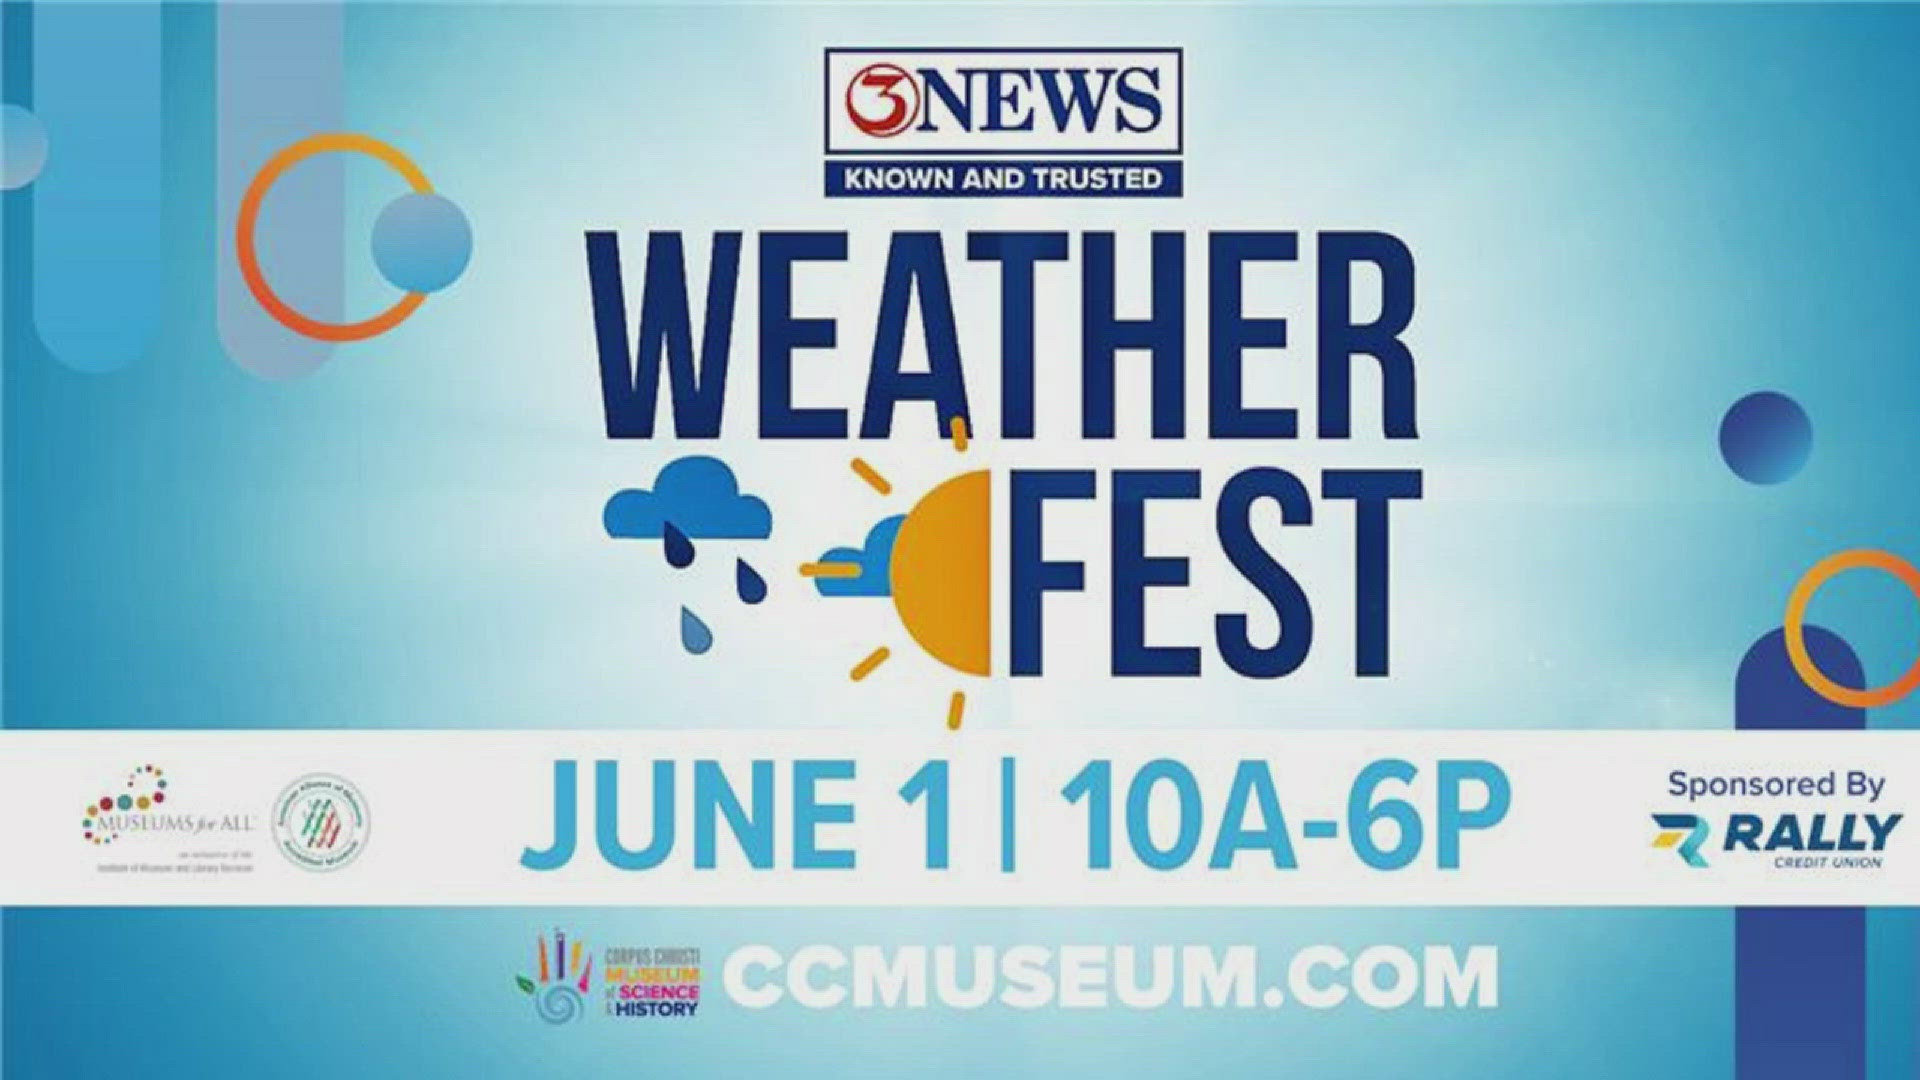 Join our 3NEWS Meteorologists and other local experts for a day of weather-related learning and fun on June 1 at the Museum of Science and History.